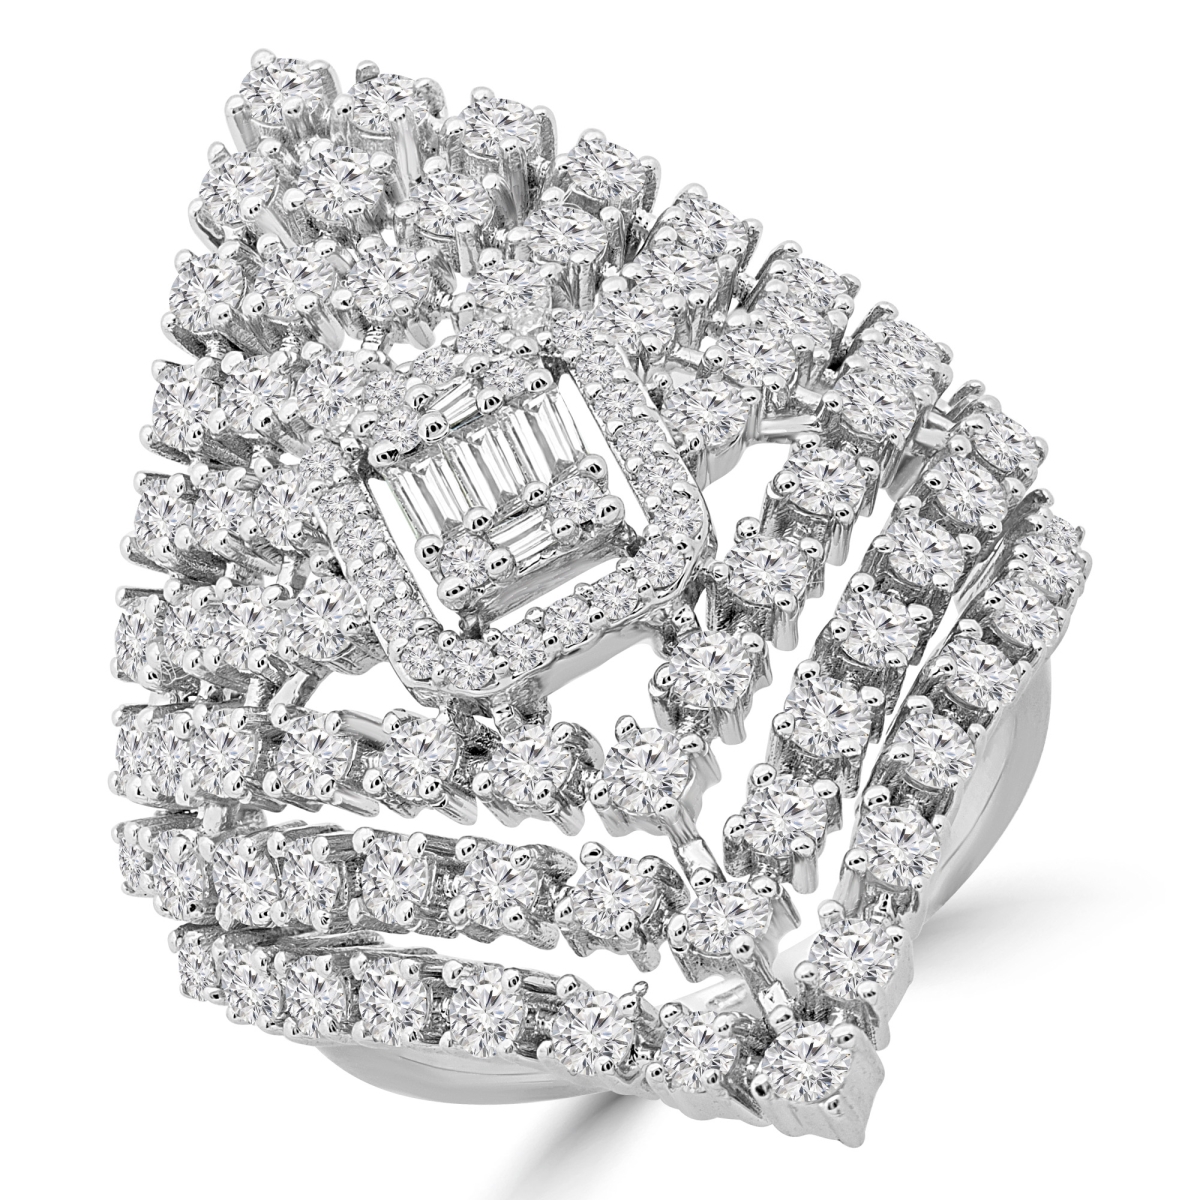 Picture of Majesty Diamonds MDR190084-3.5 2.125 CTW Baguette Diamond Cocktail Ring in 14K White Gold - Size 3.5